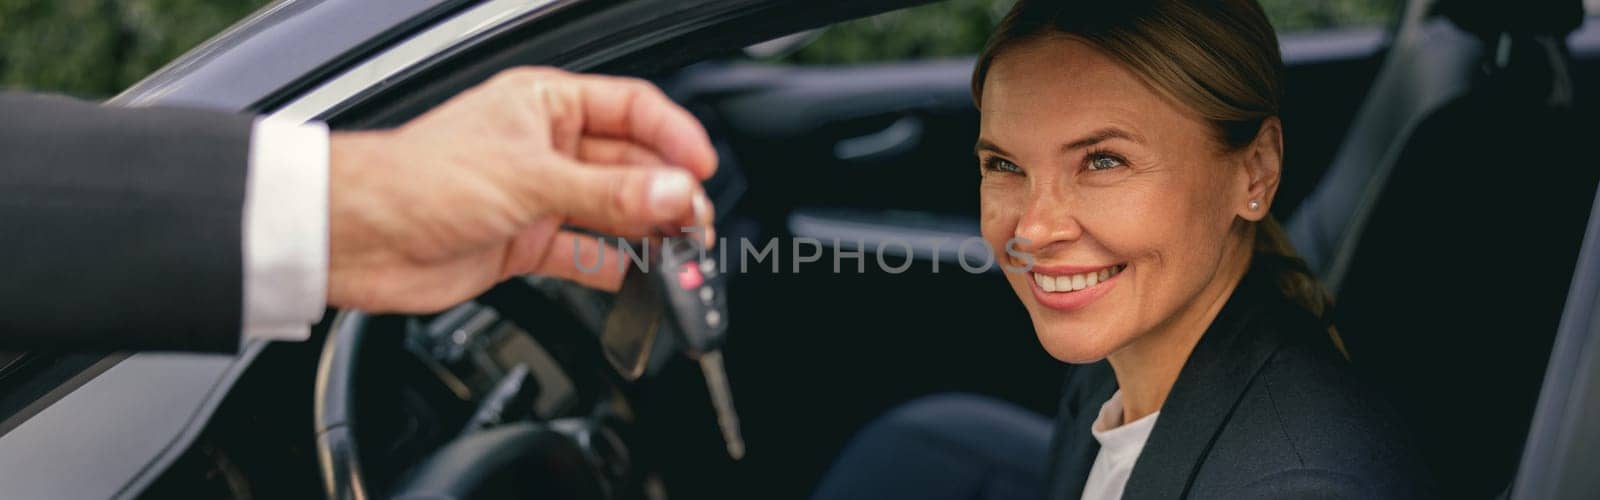 Close up of smiling business woman in suit receiving car keys to new vehicle by Yaroslav_astakhov